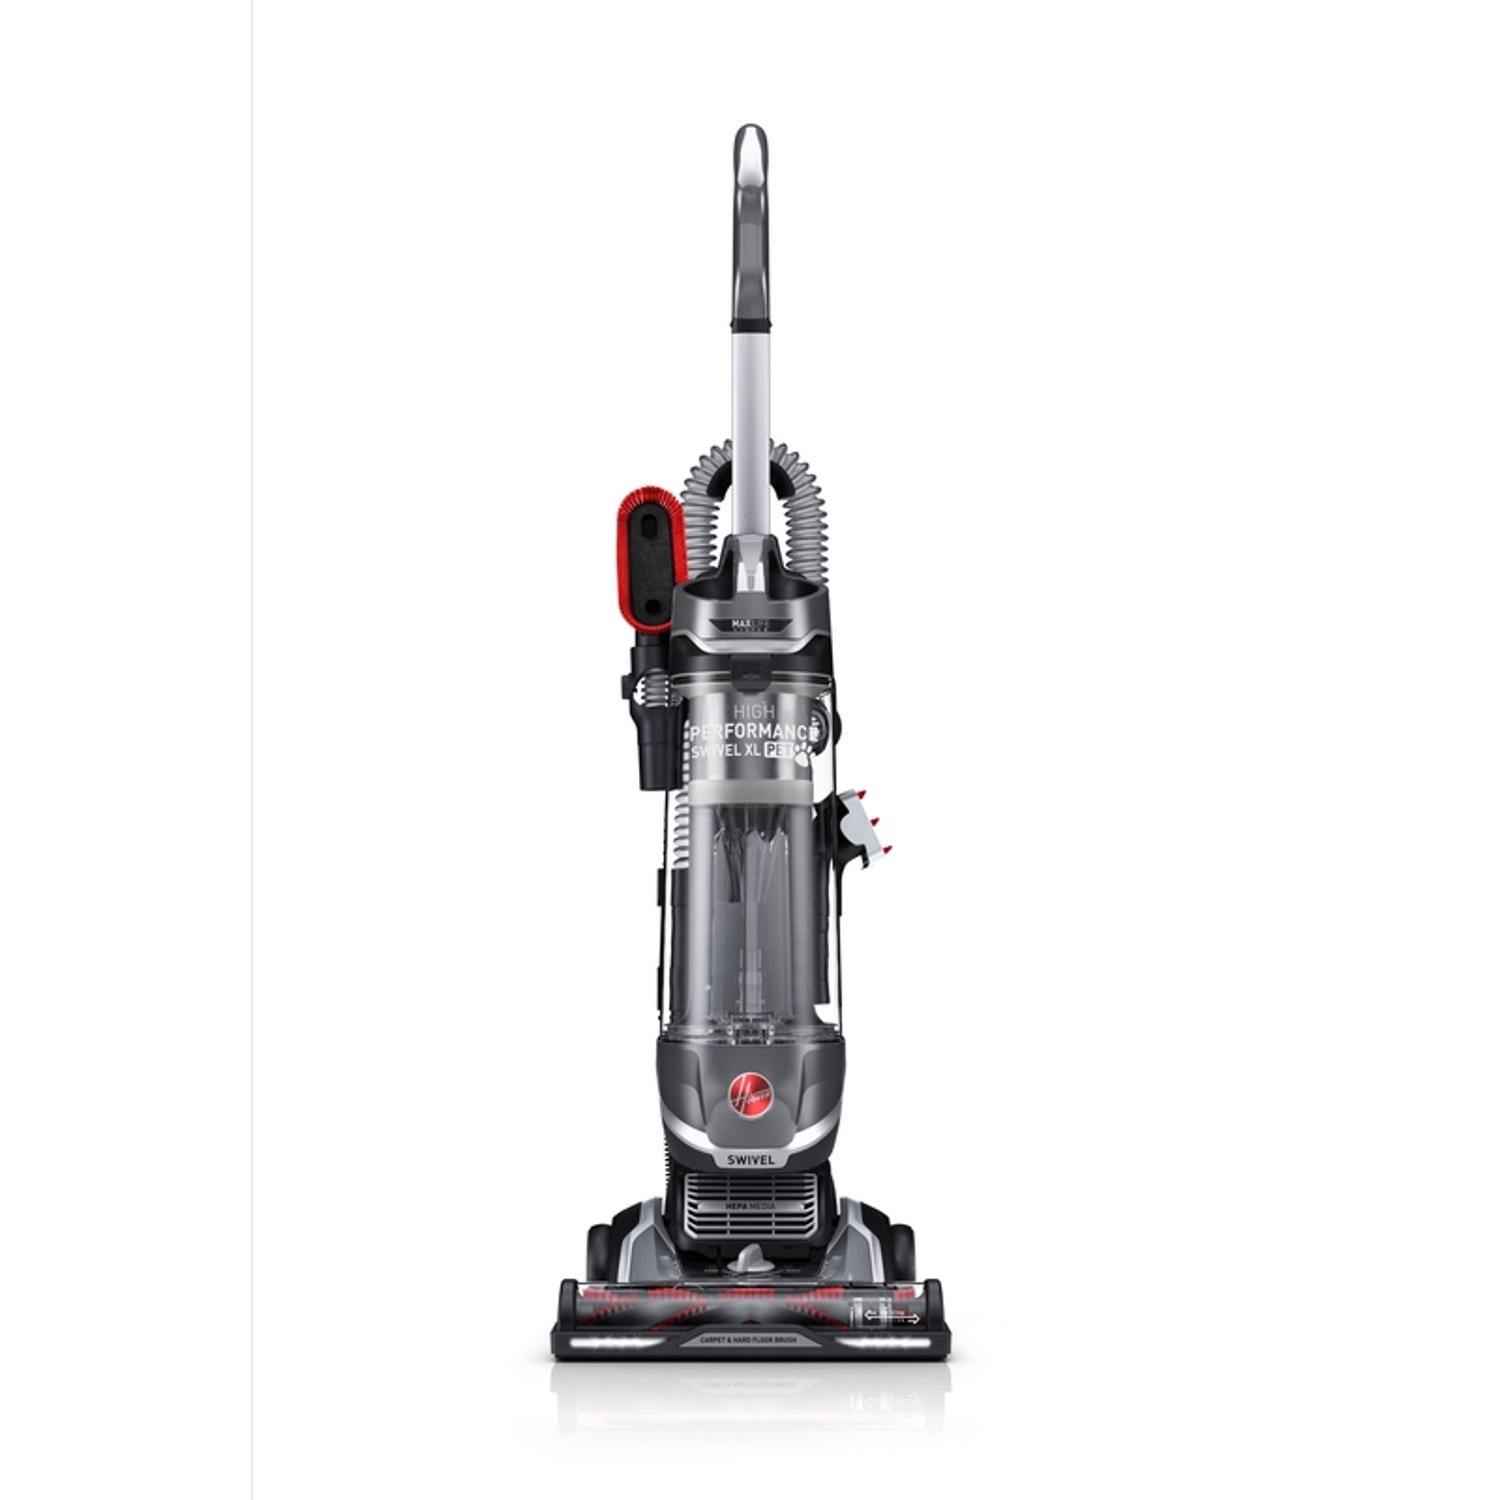 Photos - Vacuum Cleaner Hoover High Performance Bagless Corded HEPA Filter Upright Vacuum UH75200 